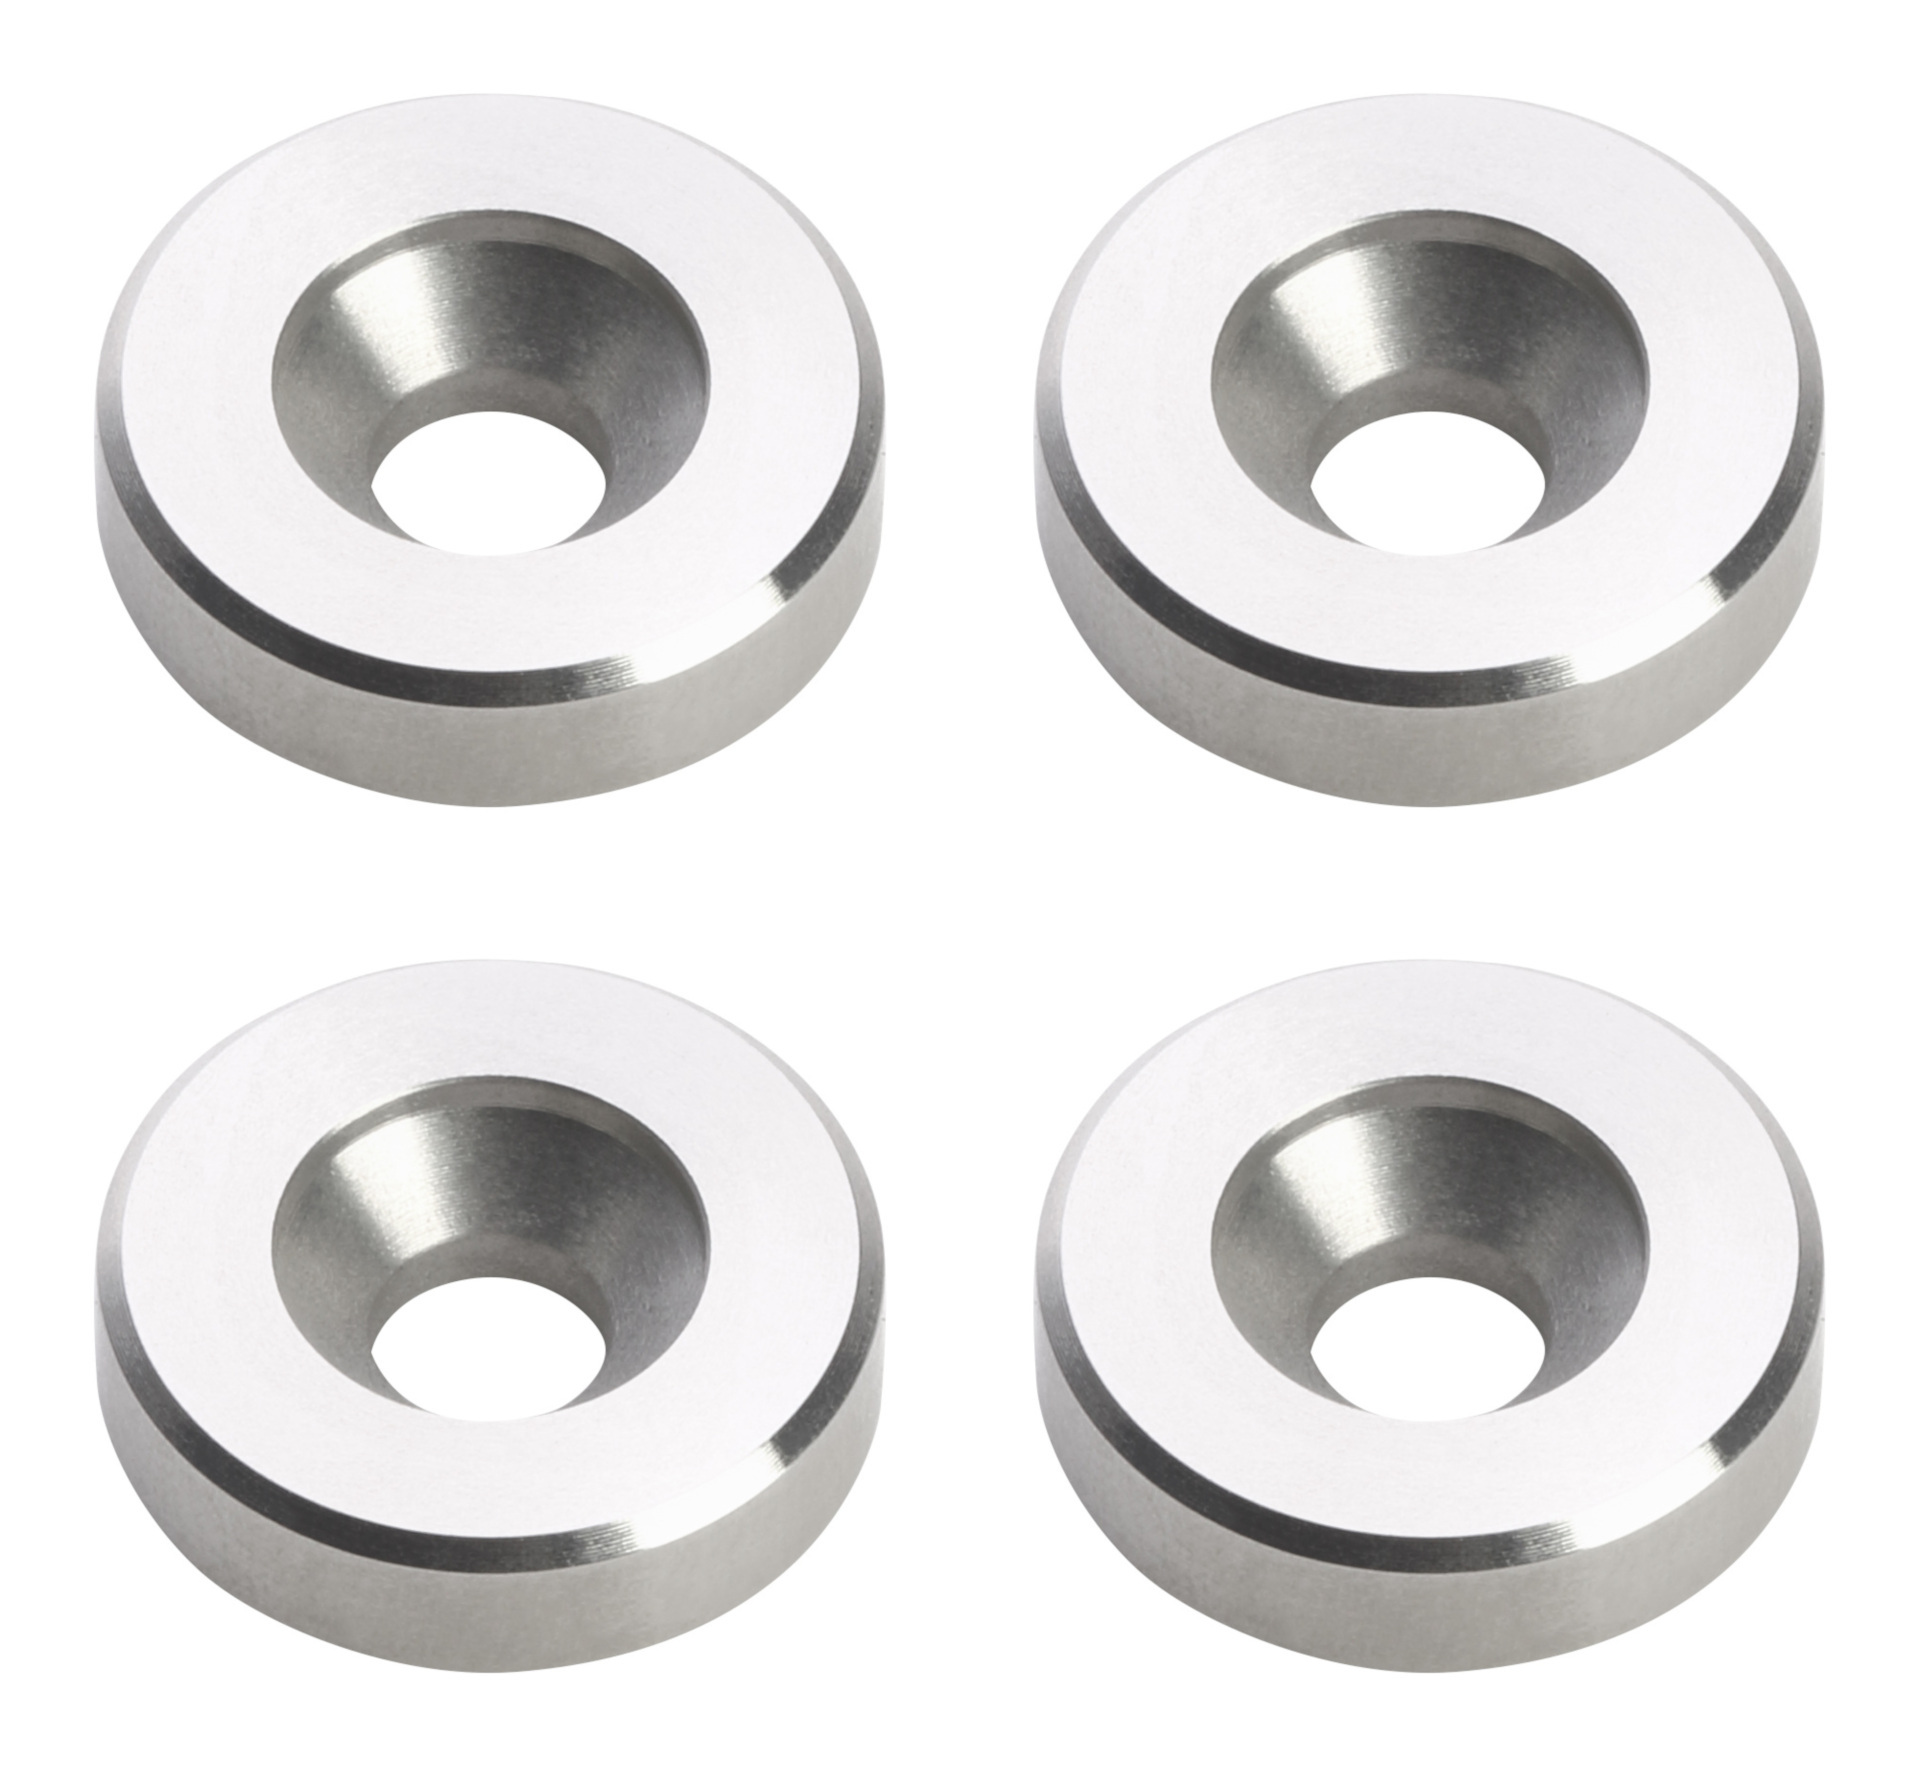 Sadowsky Parts - Bushing for Bolt-on Necks - 4 mm - Stainless Steel - 4 Pieces